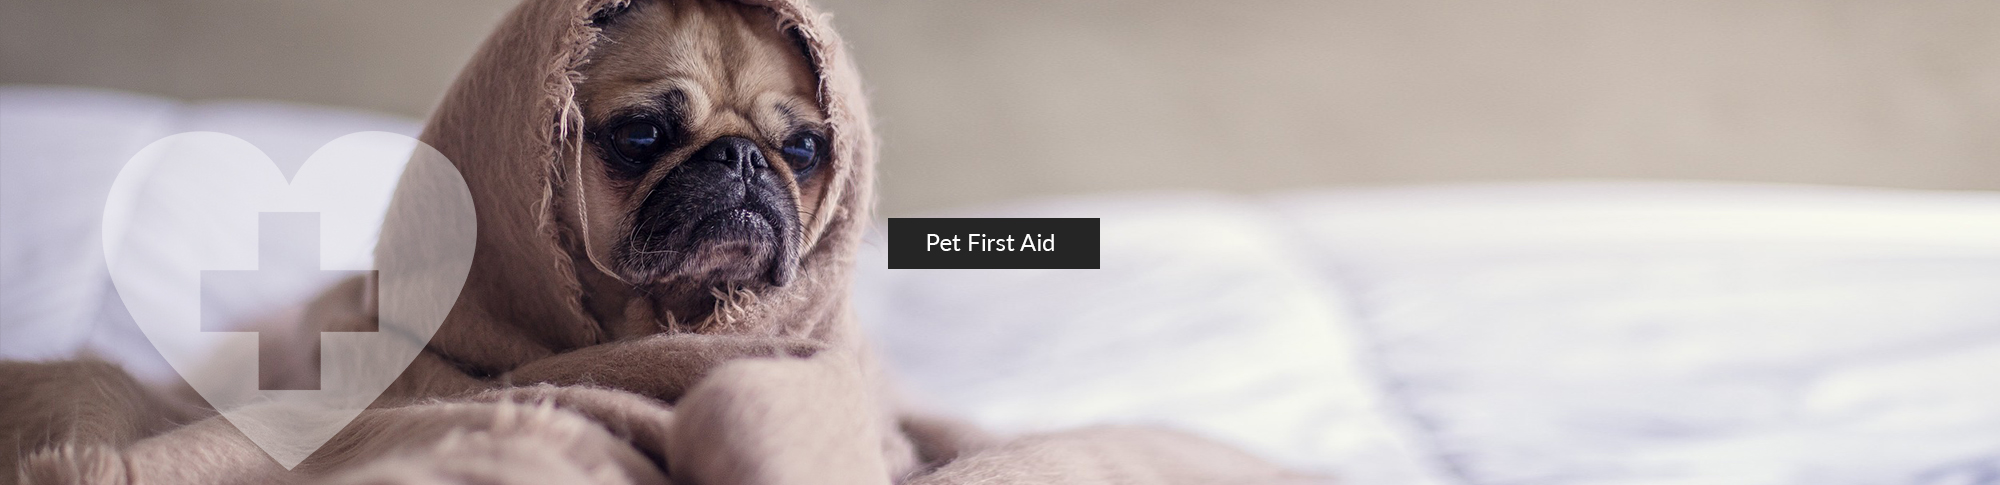 Pet First Aid - Sit n' Stay Pet Services Buffalo NY